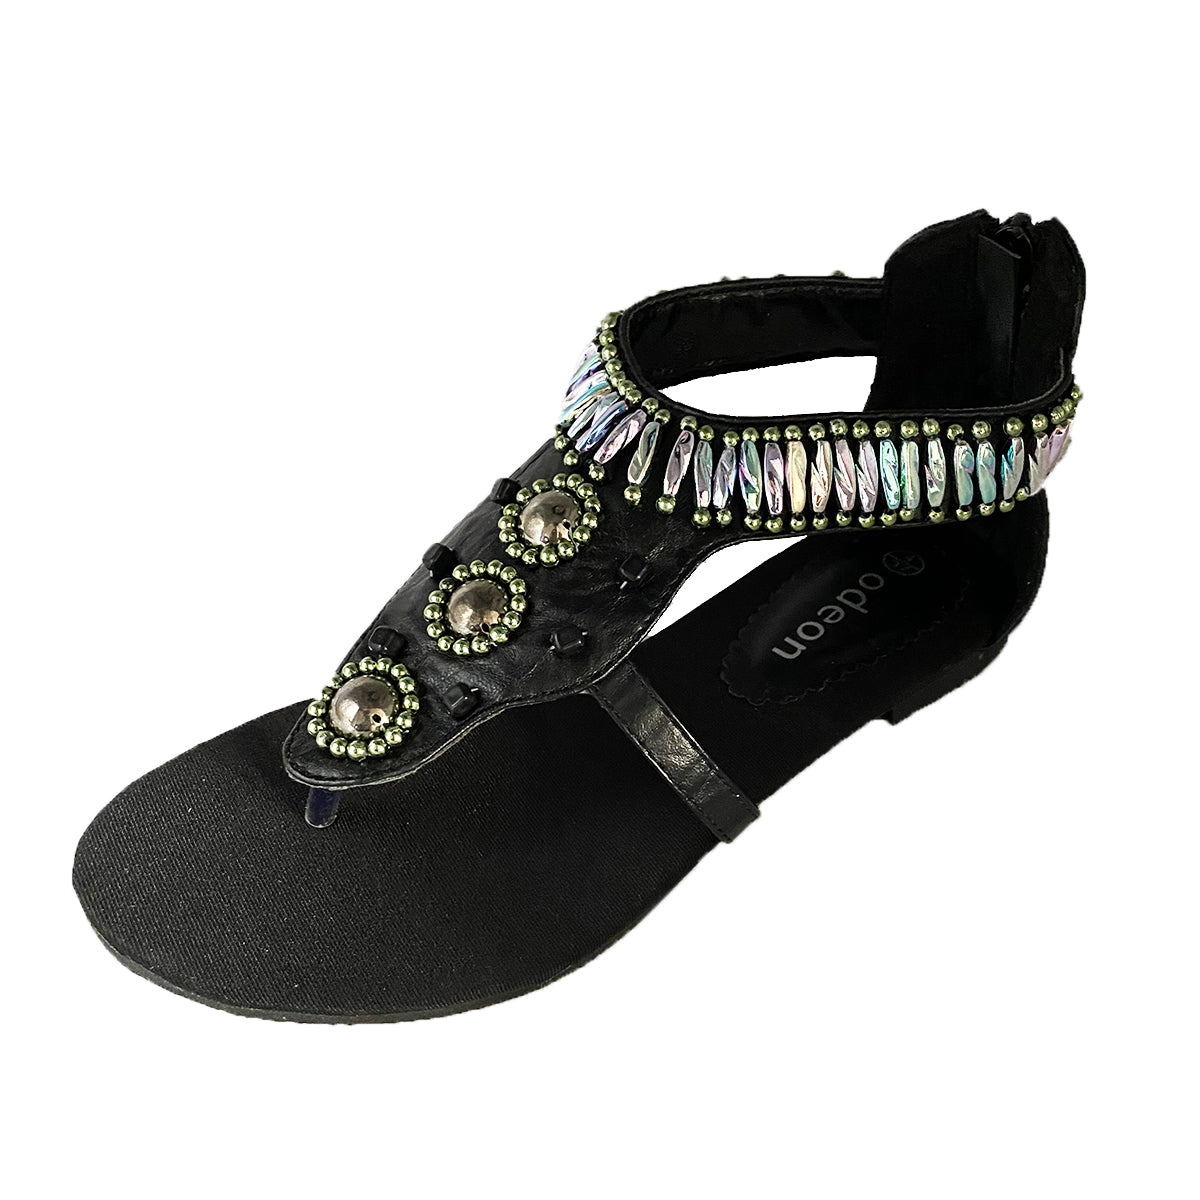 Heavy Beaded flat t bar sandals with toe post